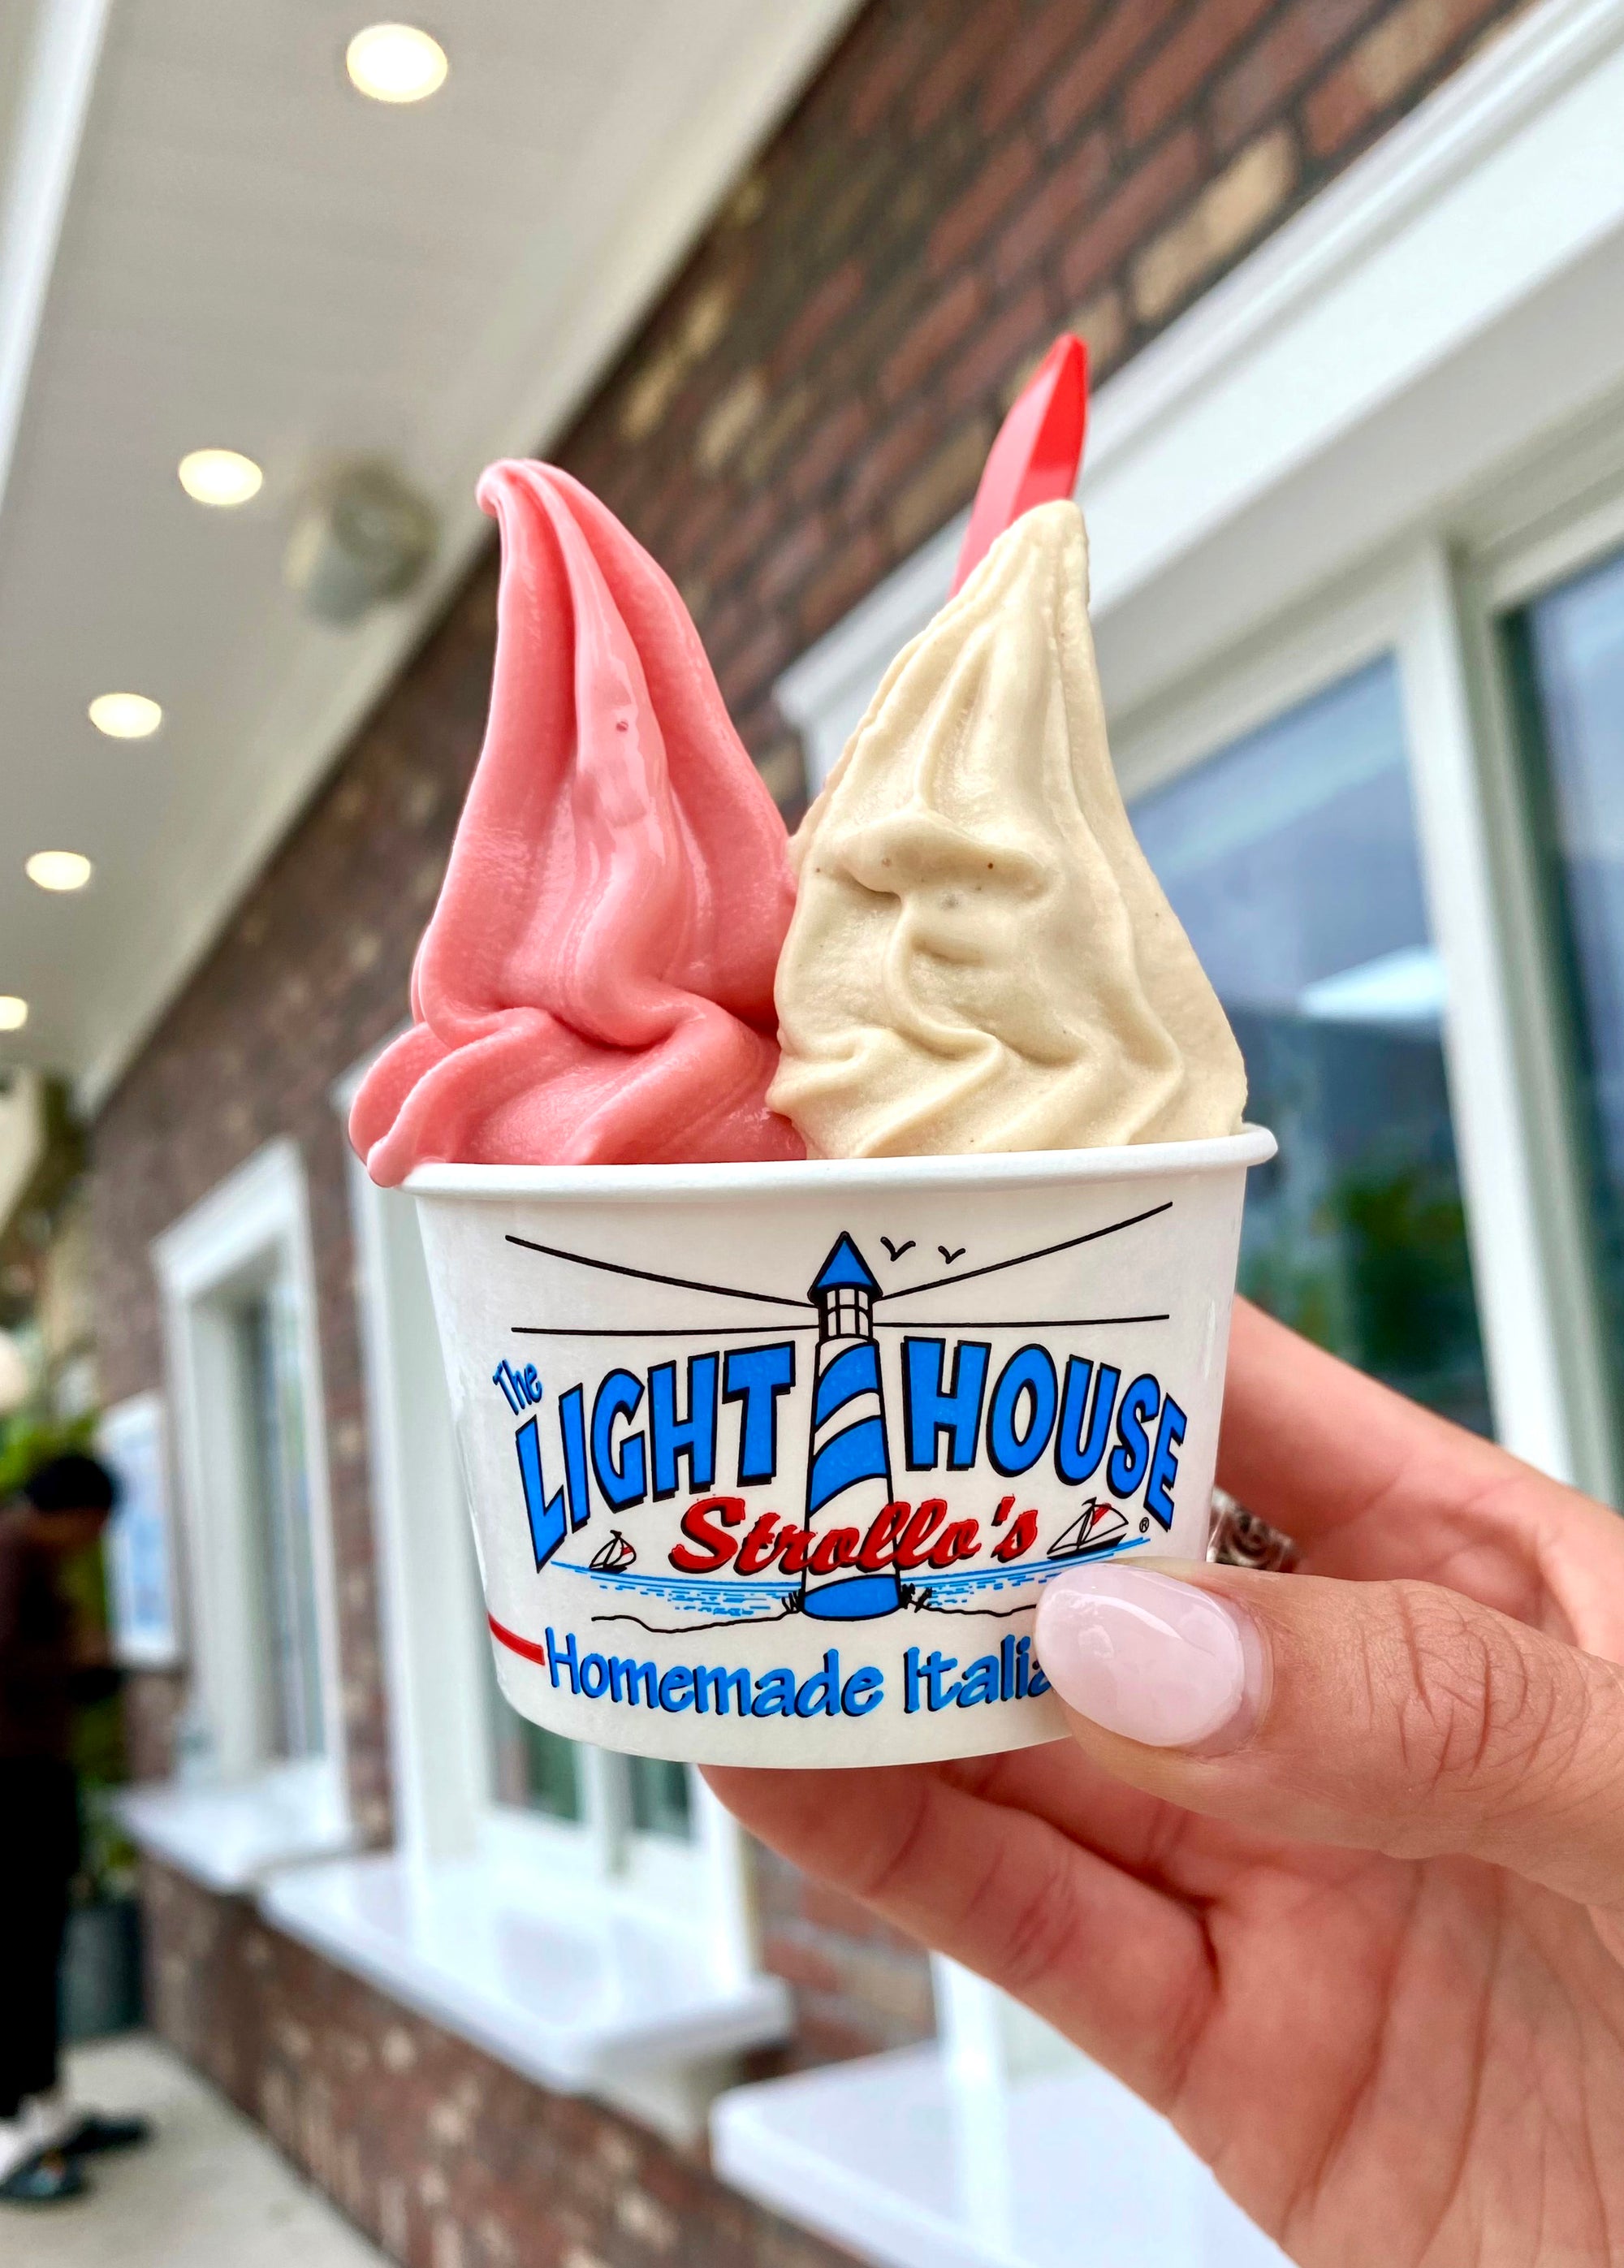 A Strollo's Lighthouse cup with two soft serve ice cream flavors, strawberry and peanut butter